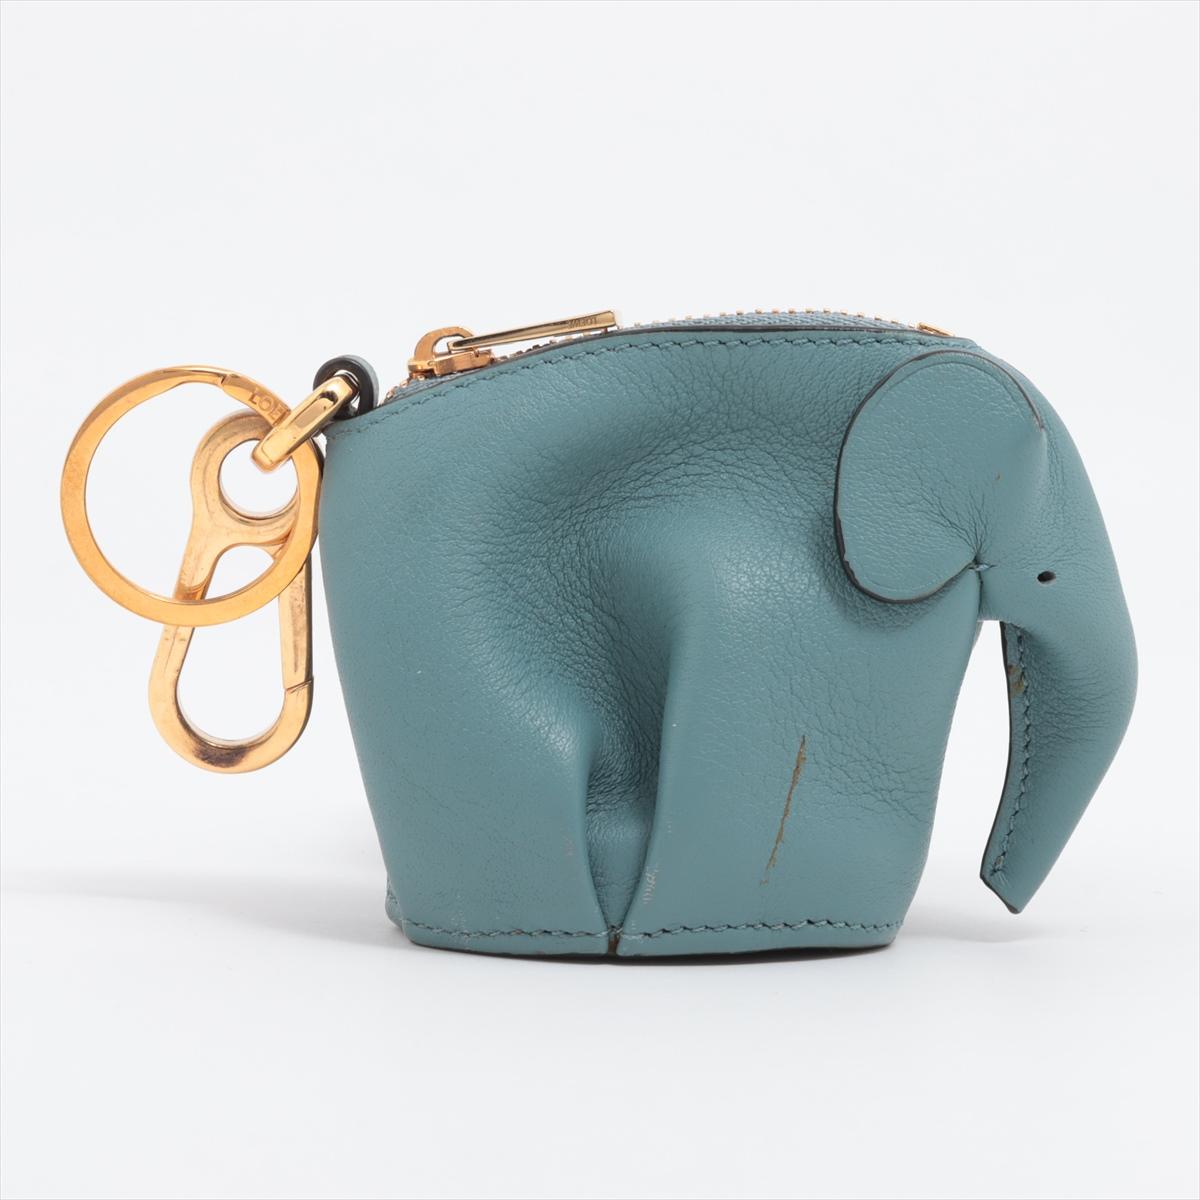 Loewe Elephant Leather Coin Purse Bag Charm Blue In Good Condition For Sale In Indianapolis, IN